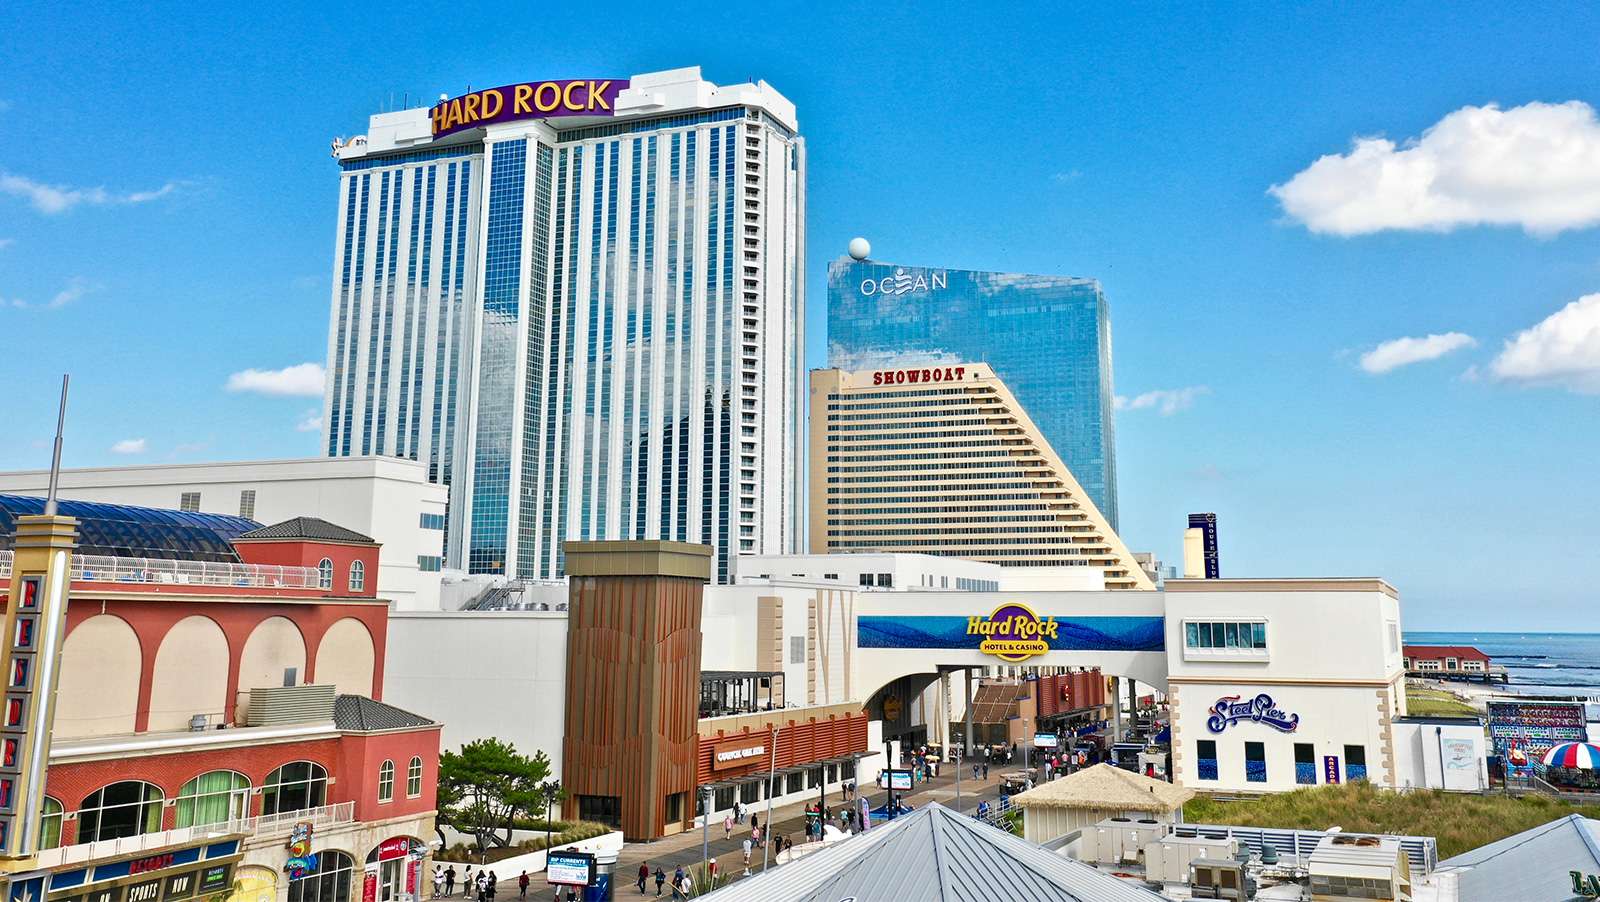 Atlantic City Casinos Inch Closer to Reduced Property Payments